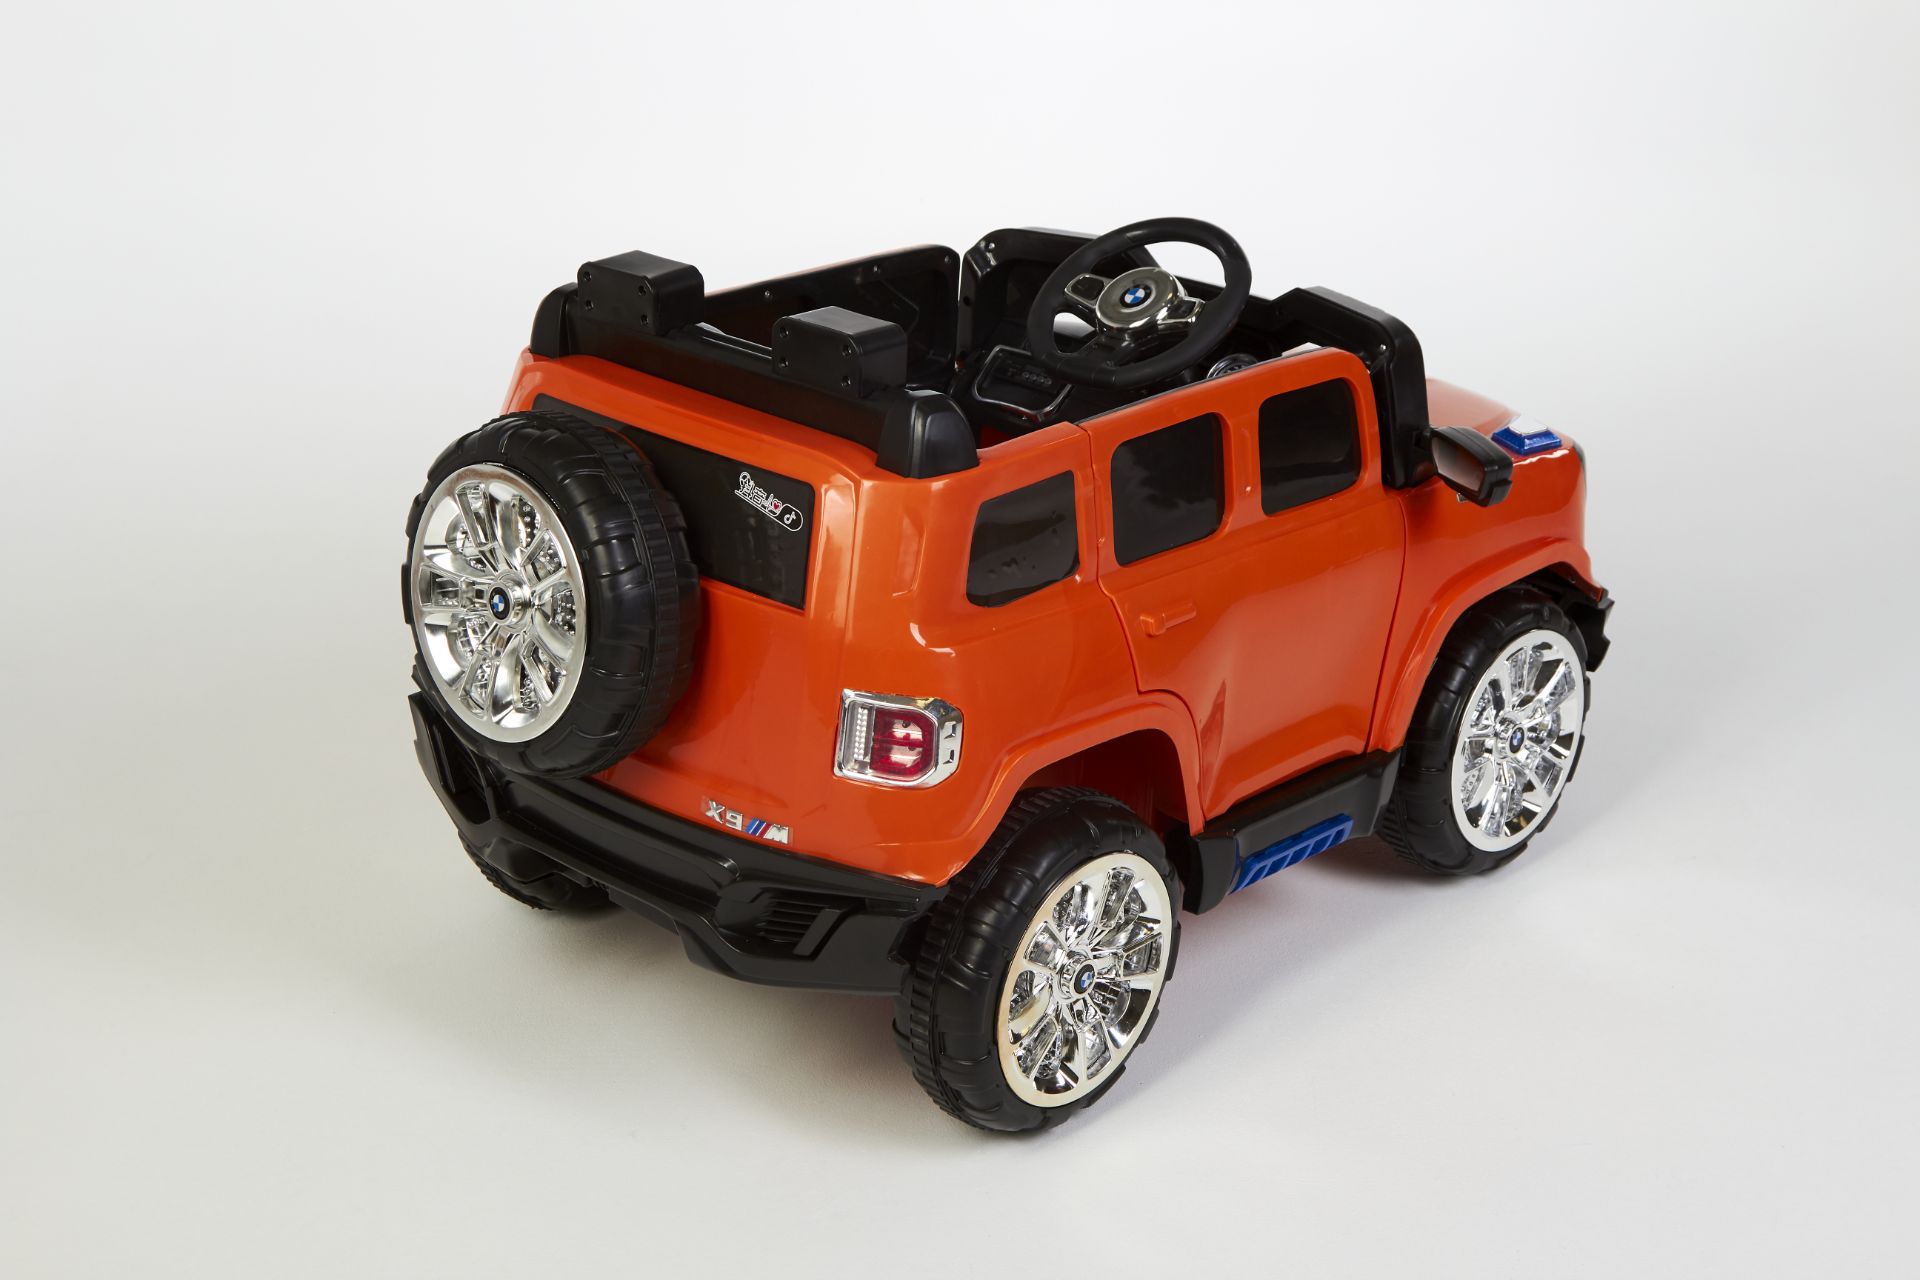 ORANGE KIDS ELECTRIC RIDE ON CAR WITH PARENTAL CONTROL BRAND NEW BOXED - Image 5 of 11